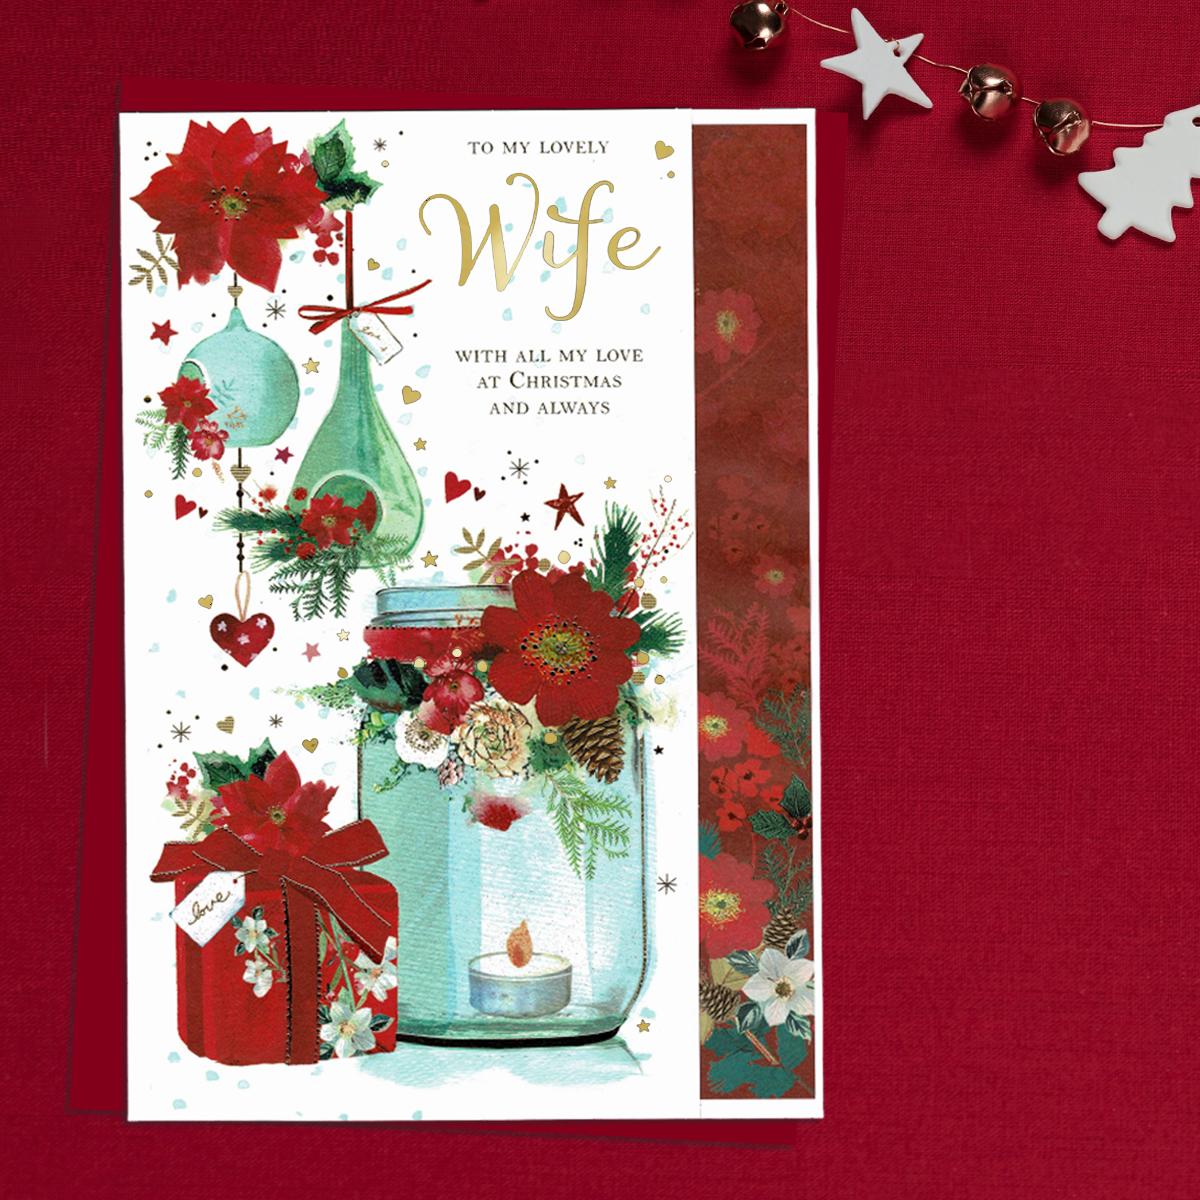 A Festive Scene Showing Hurricane Lamp, Gifts, Baubles And Poinsettias Decorate This Wife Christmas Card. Finished With Gold Foil Lettering And Accents And Completed With a Red Envelope